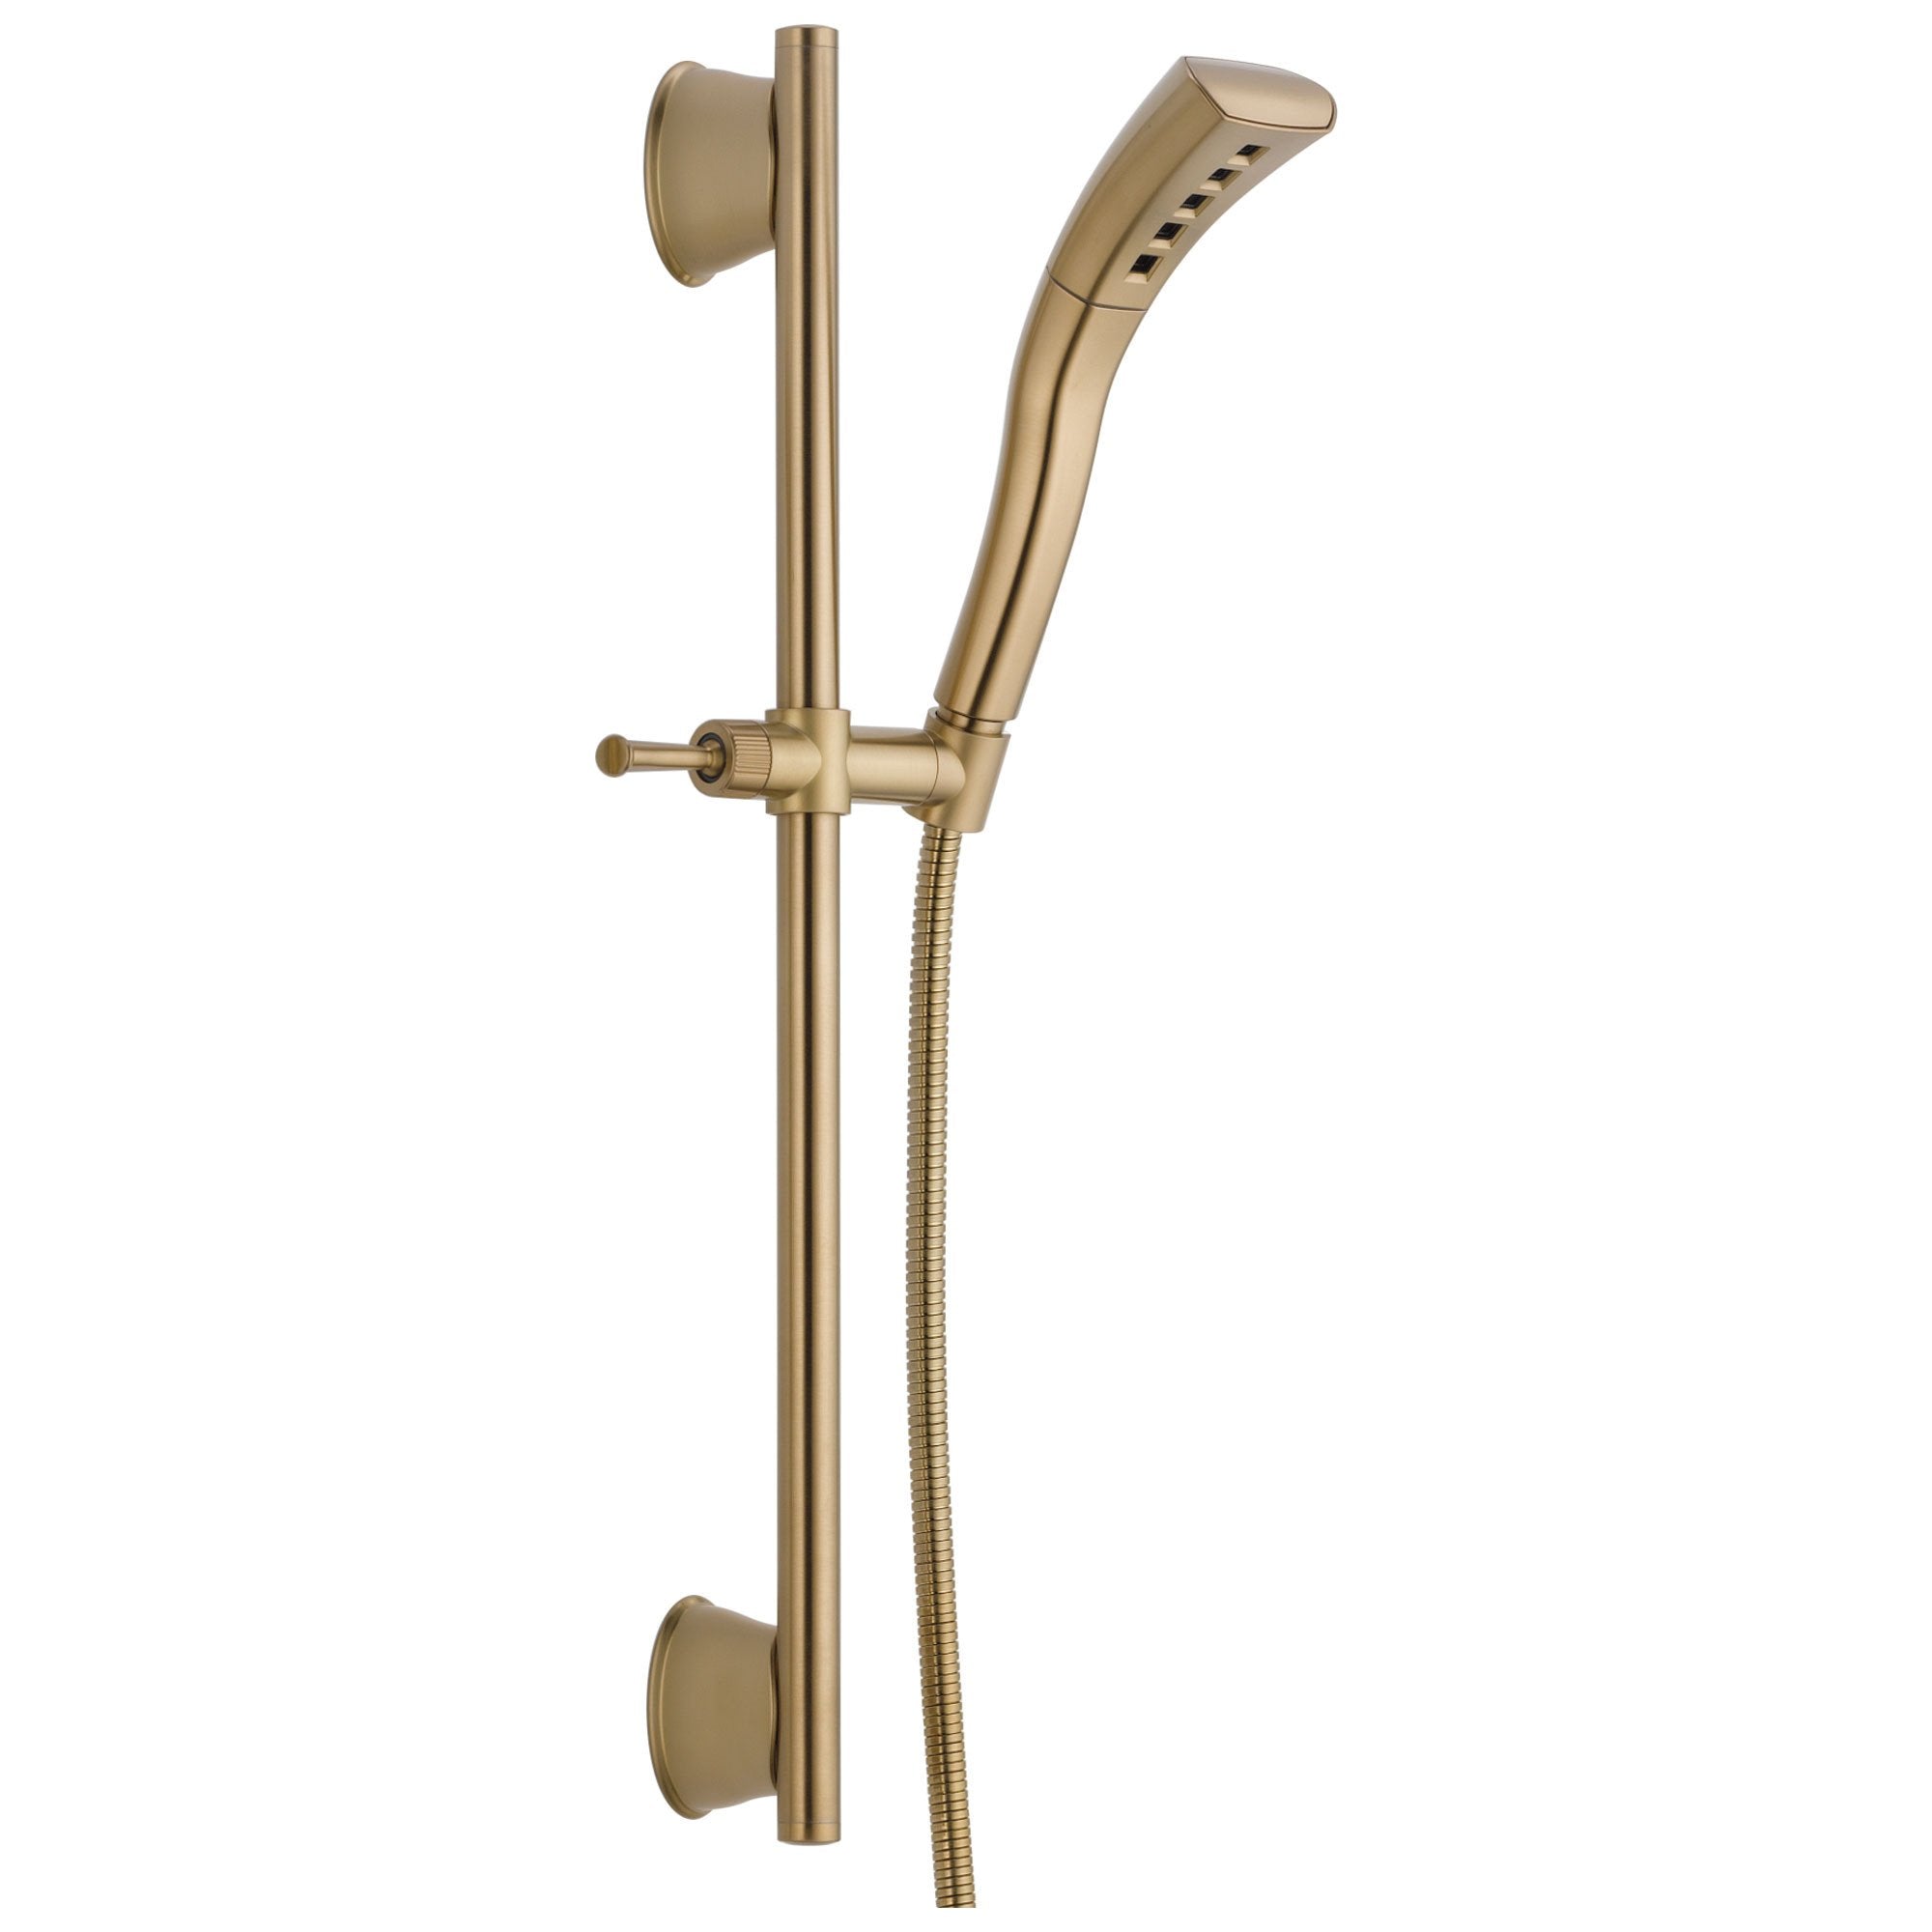 Delta Universal Showering Components Collection Champagne Bronze Finish Wall Mounted Slide Bar Hand Shower Sprayer with Hose D51579CZ